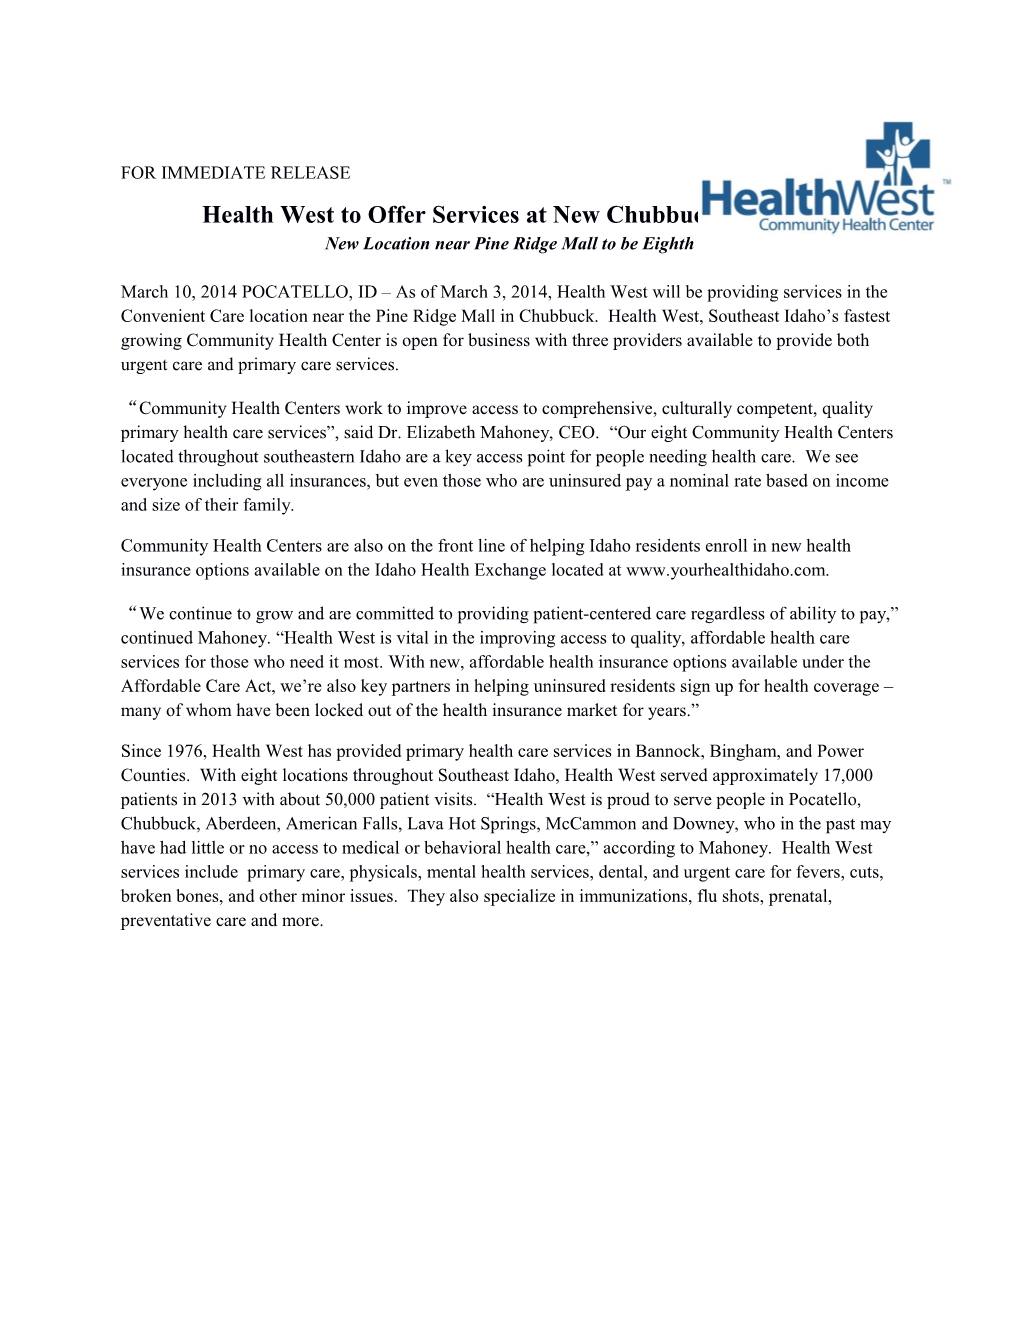 Health West to Offer Services at New Chubbuck Location